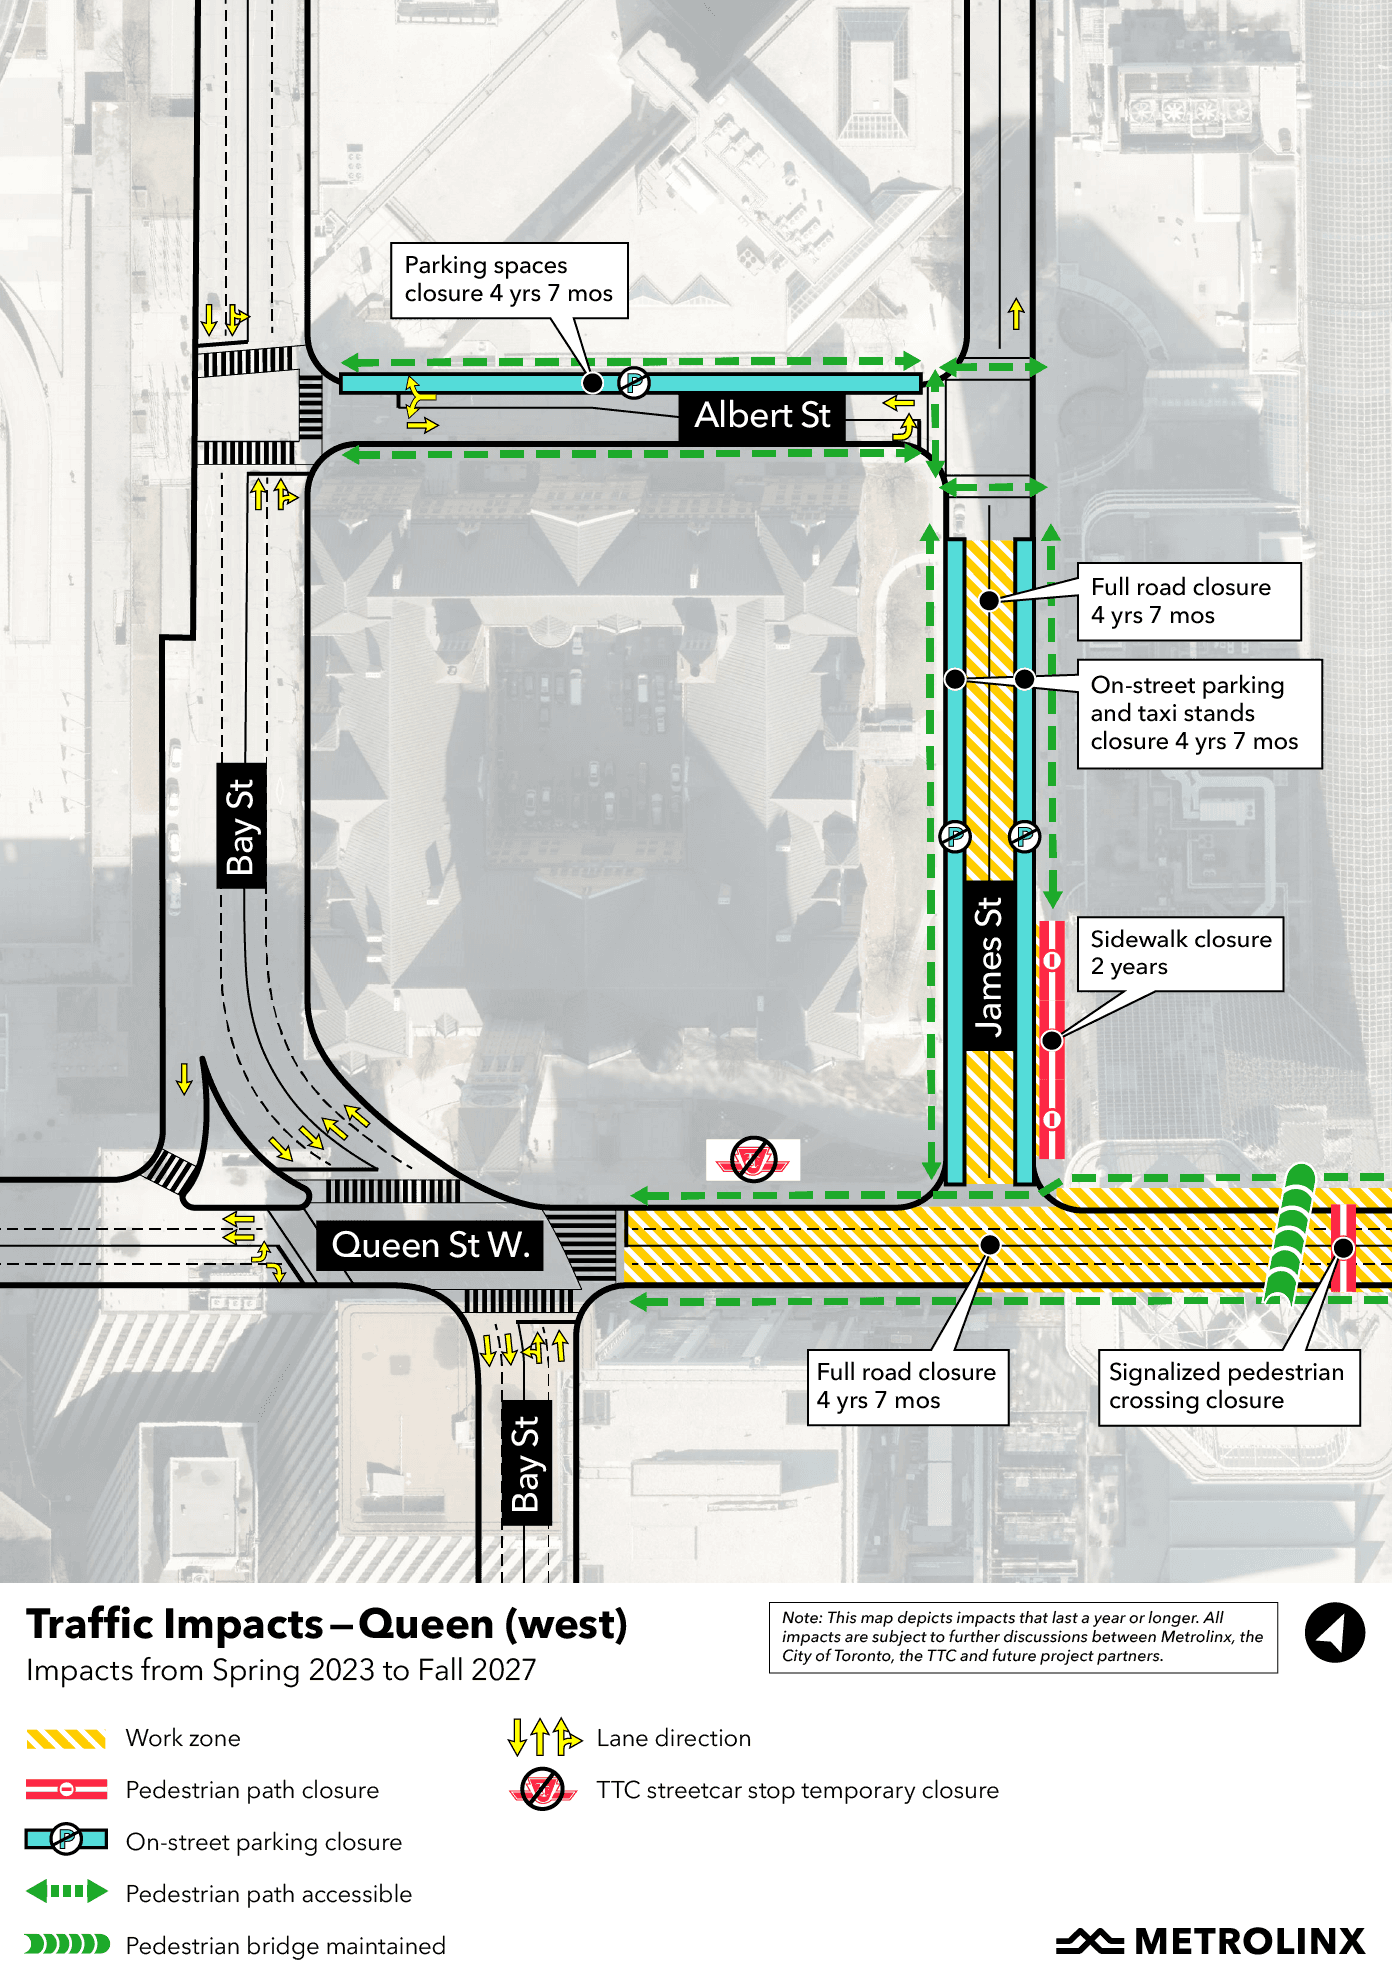 Traffic Impacts - Queen Station West